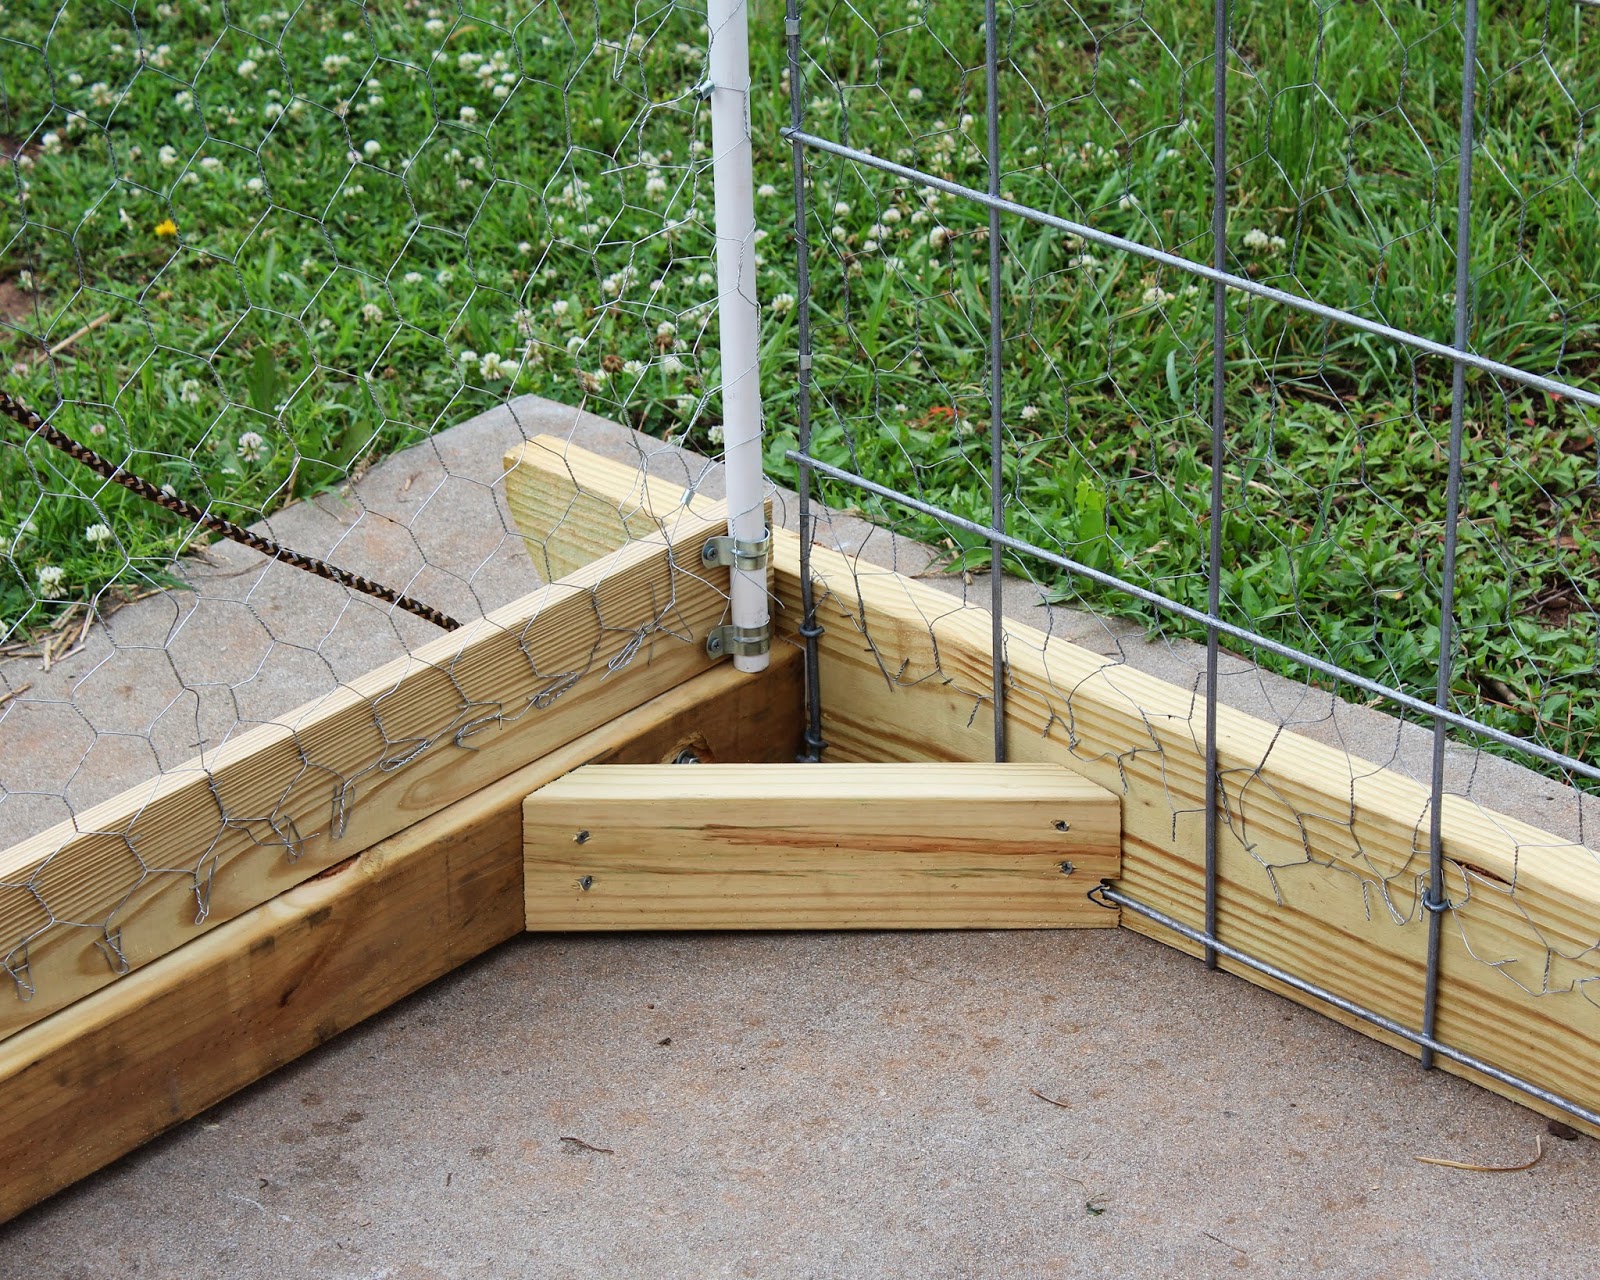 Two 6' treated 2x4's and notched angled braces complete a sturdy base.